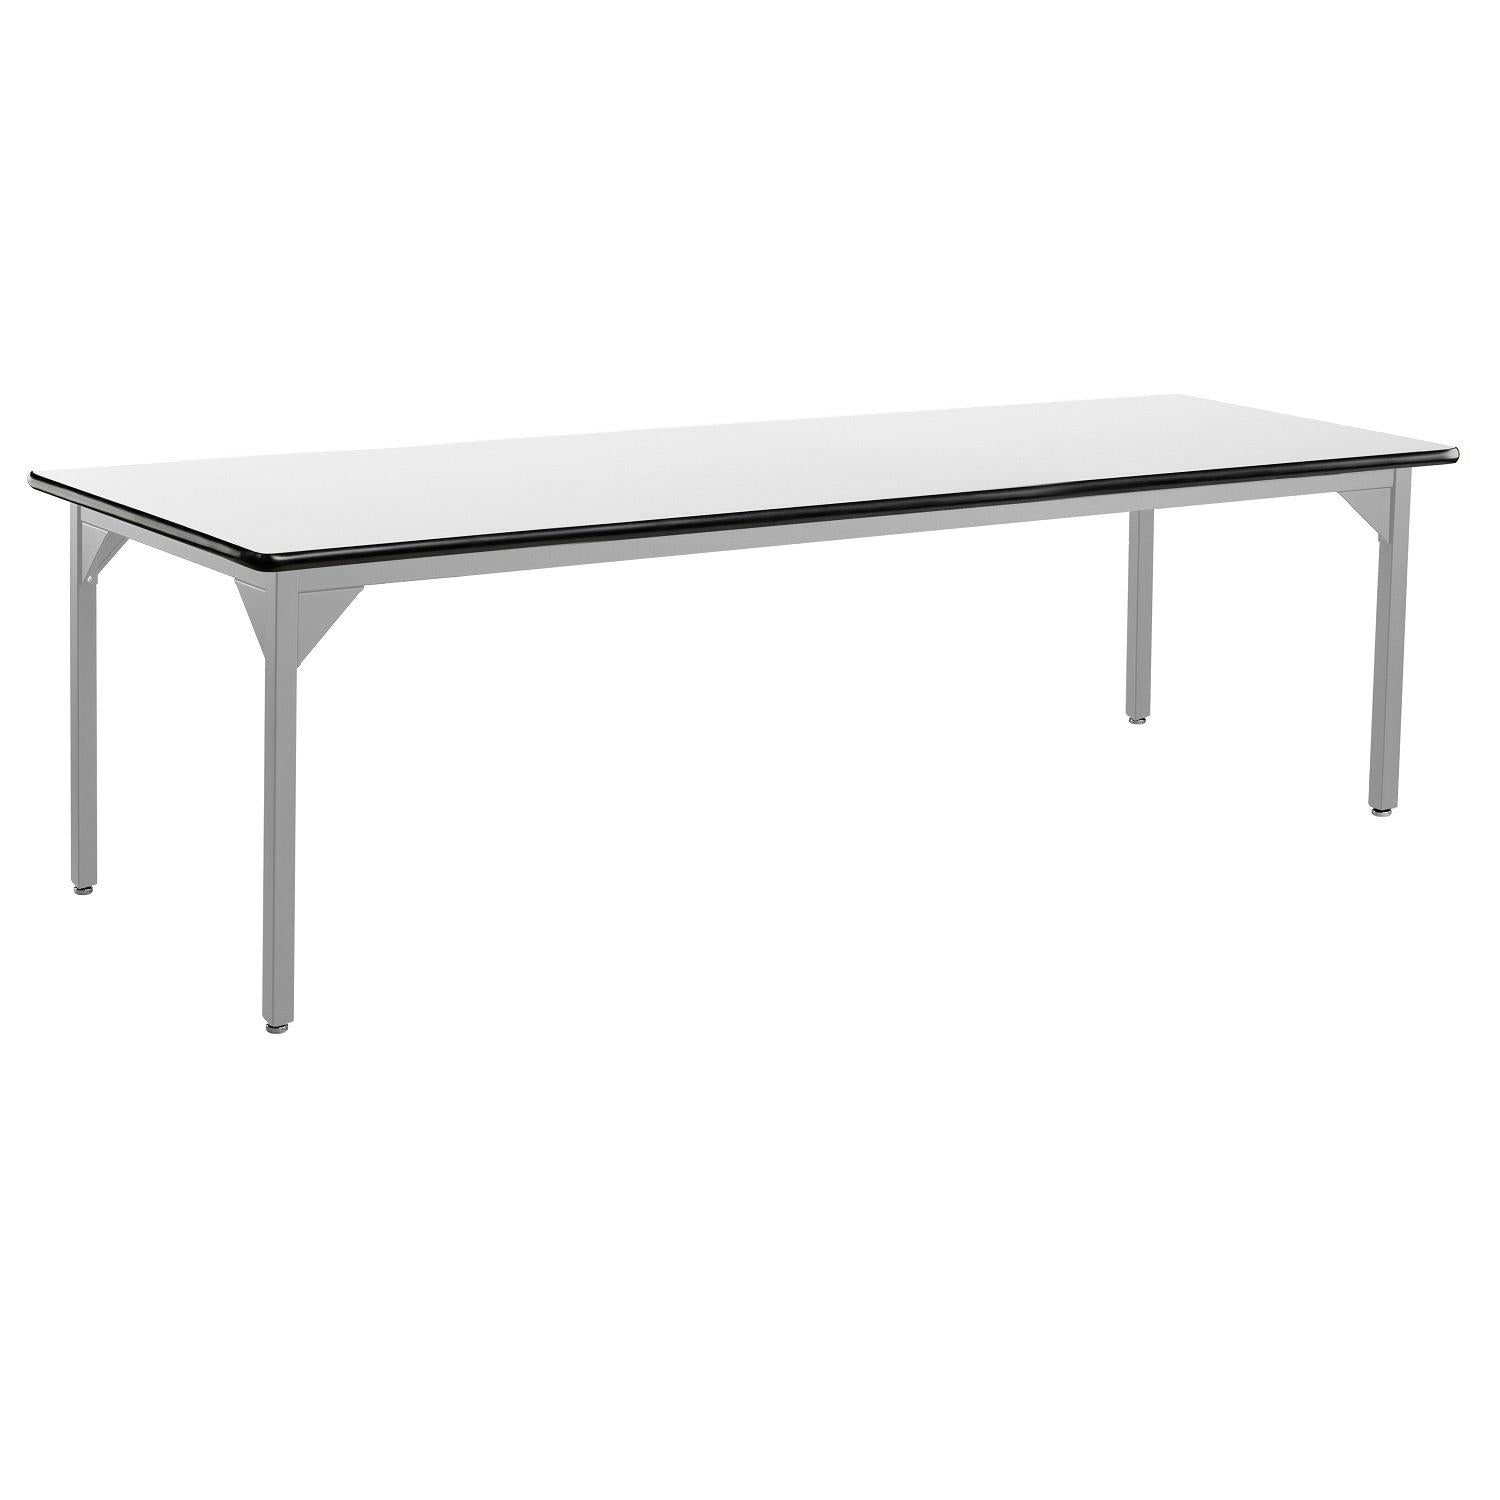 Heavy-Duty Fixed Height Utility Table, Soft Grey Frame, 36" x 96", Whiteboard High-Pressure Laminate Top